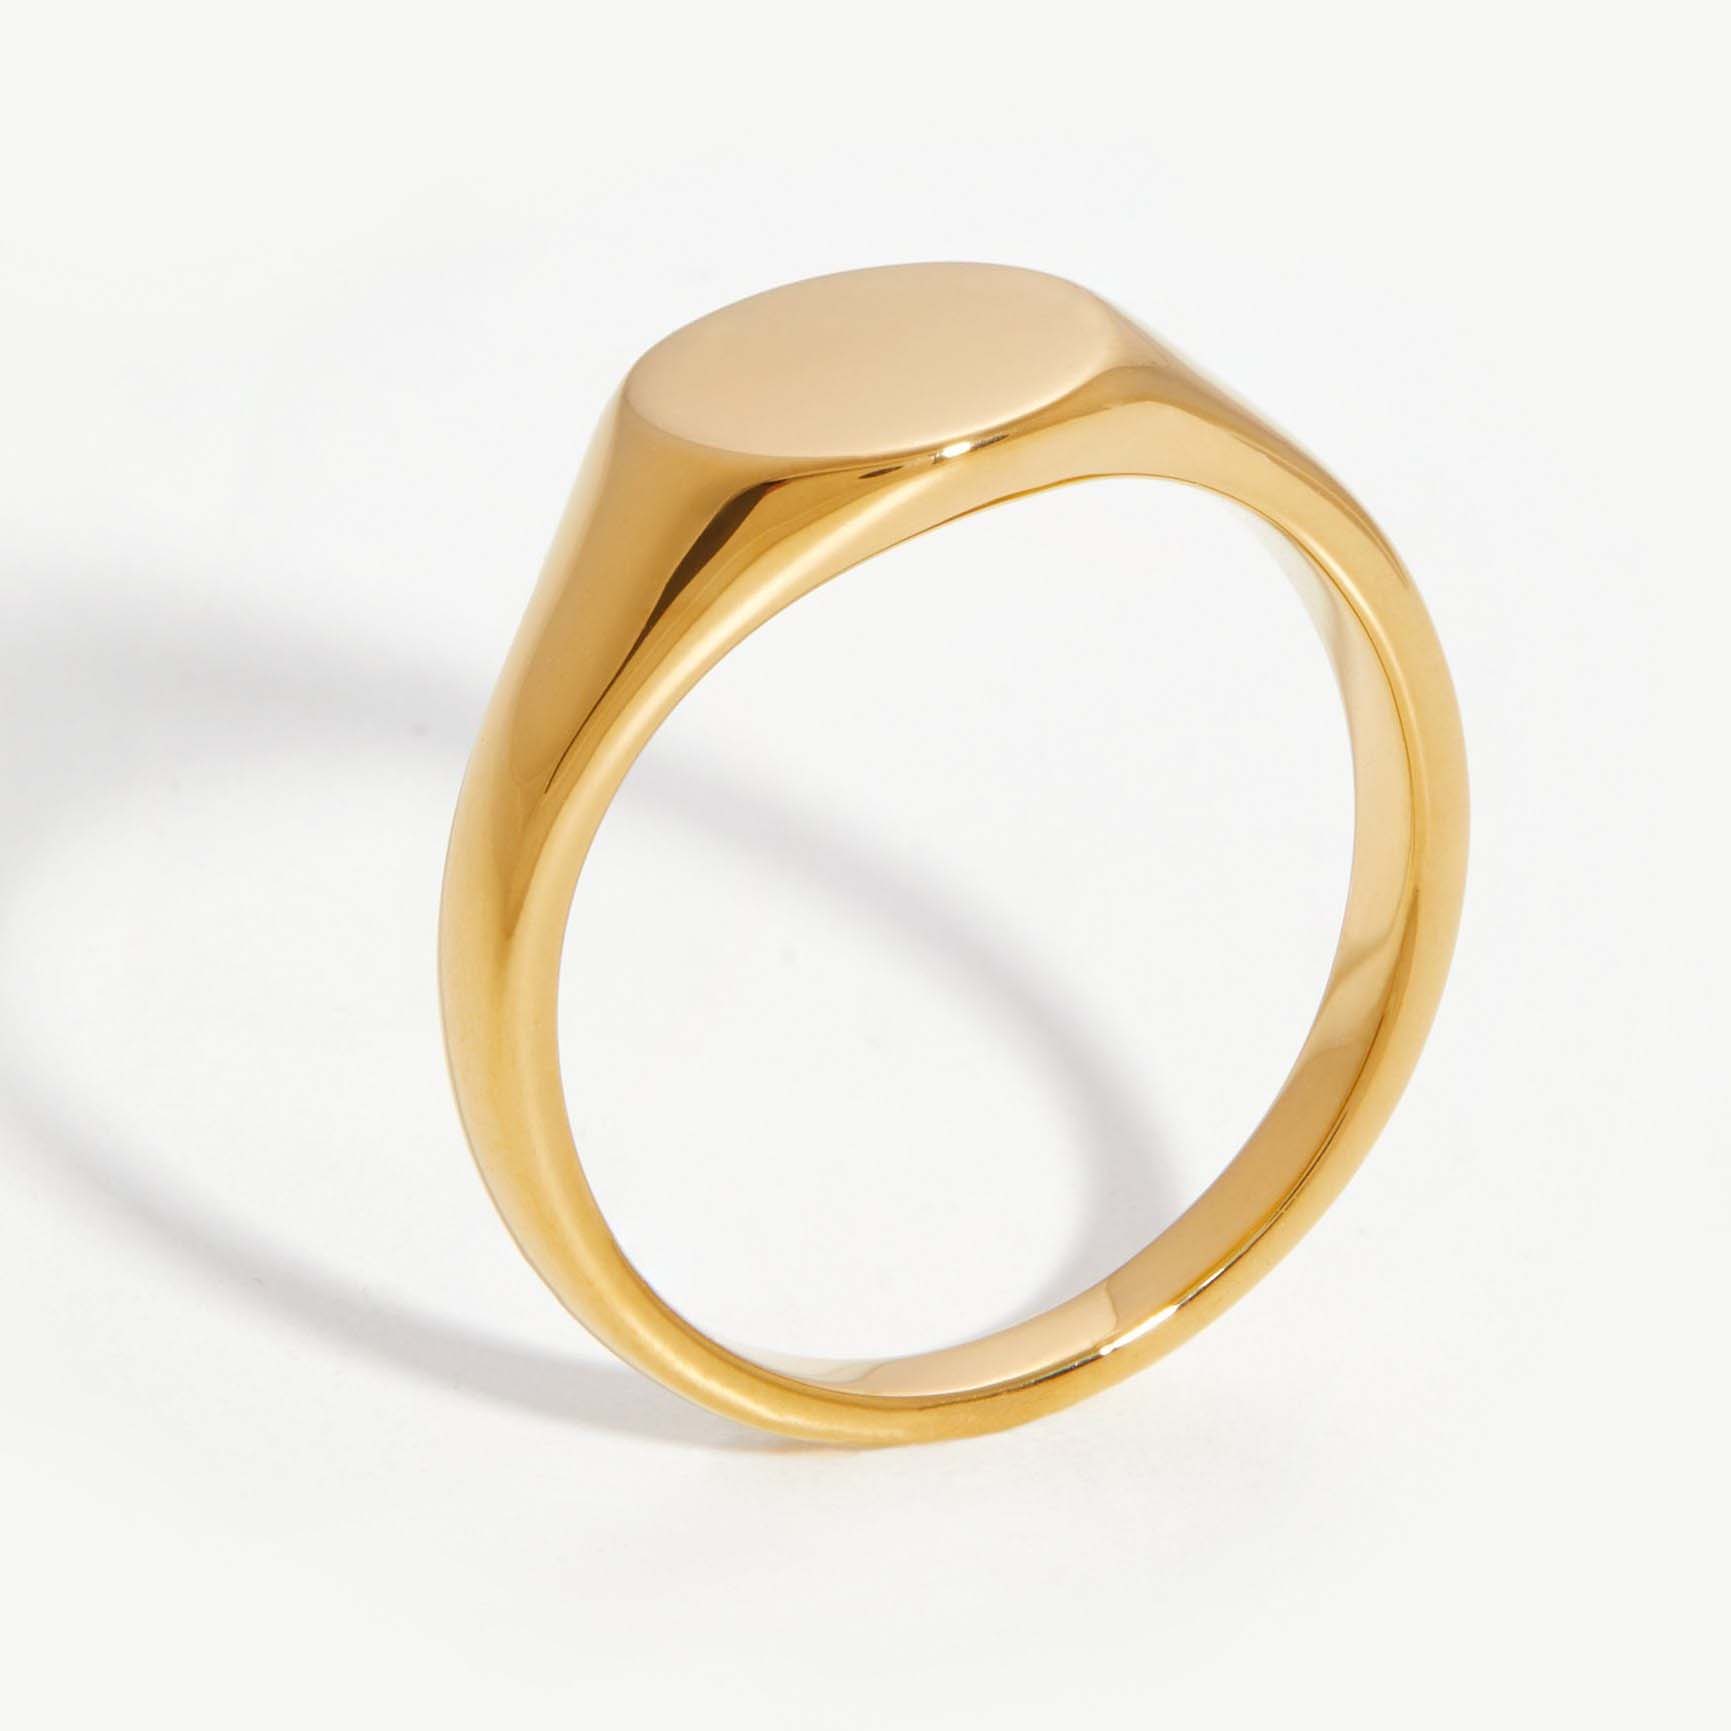 Gold vermeil jewelry manufacturer custom made silver ring in 18k gold plated